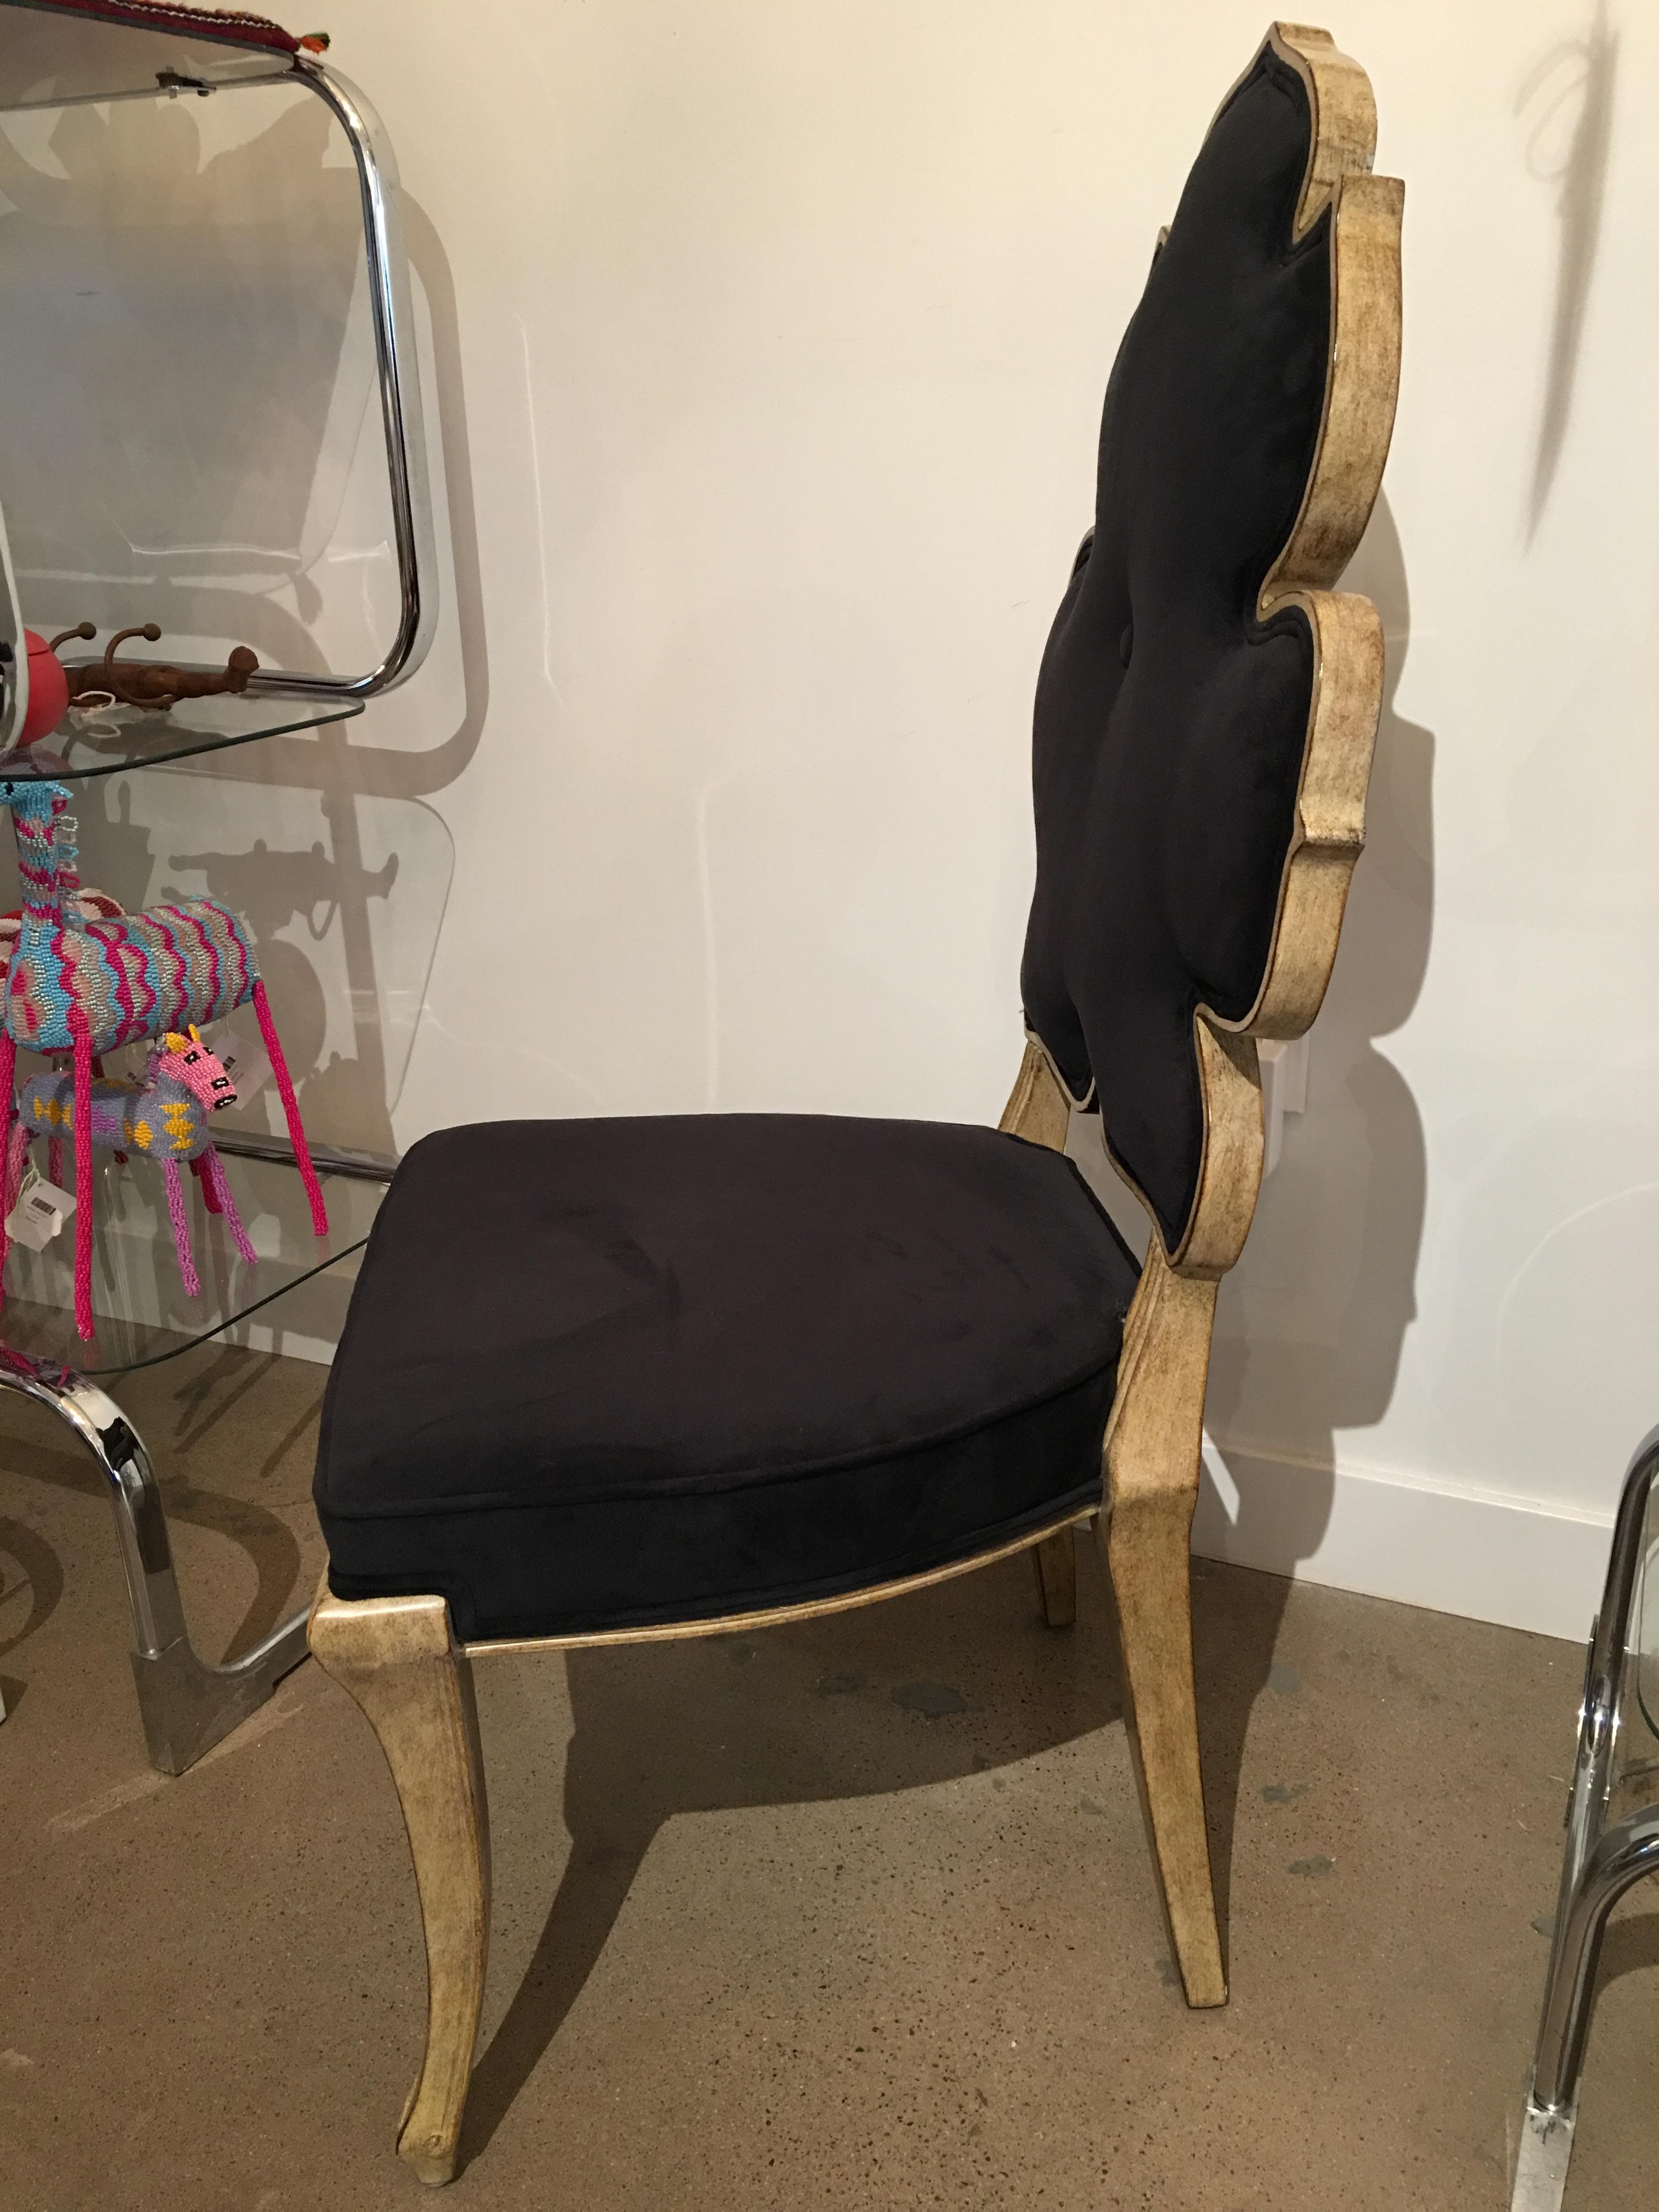 This chair designed by Julia Buckingham has a royal vibe and a feminine charm. The dining table/armless version is perfect for any style of dining room table as it fits right in with a whimsical note. Chair is upholstered in black nylon velvet.